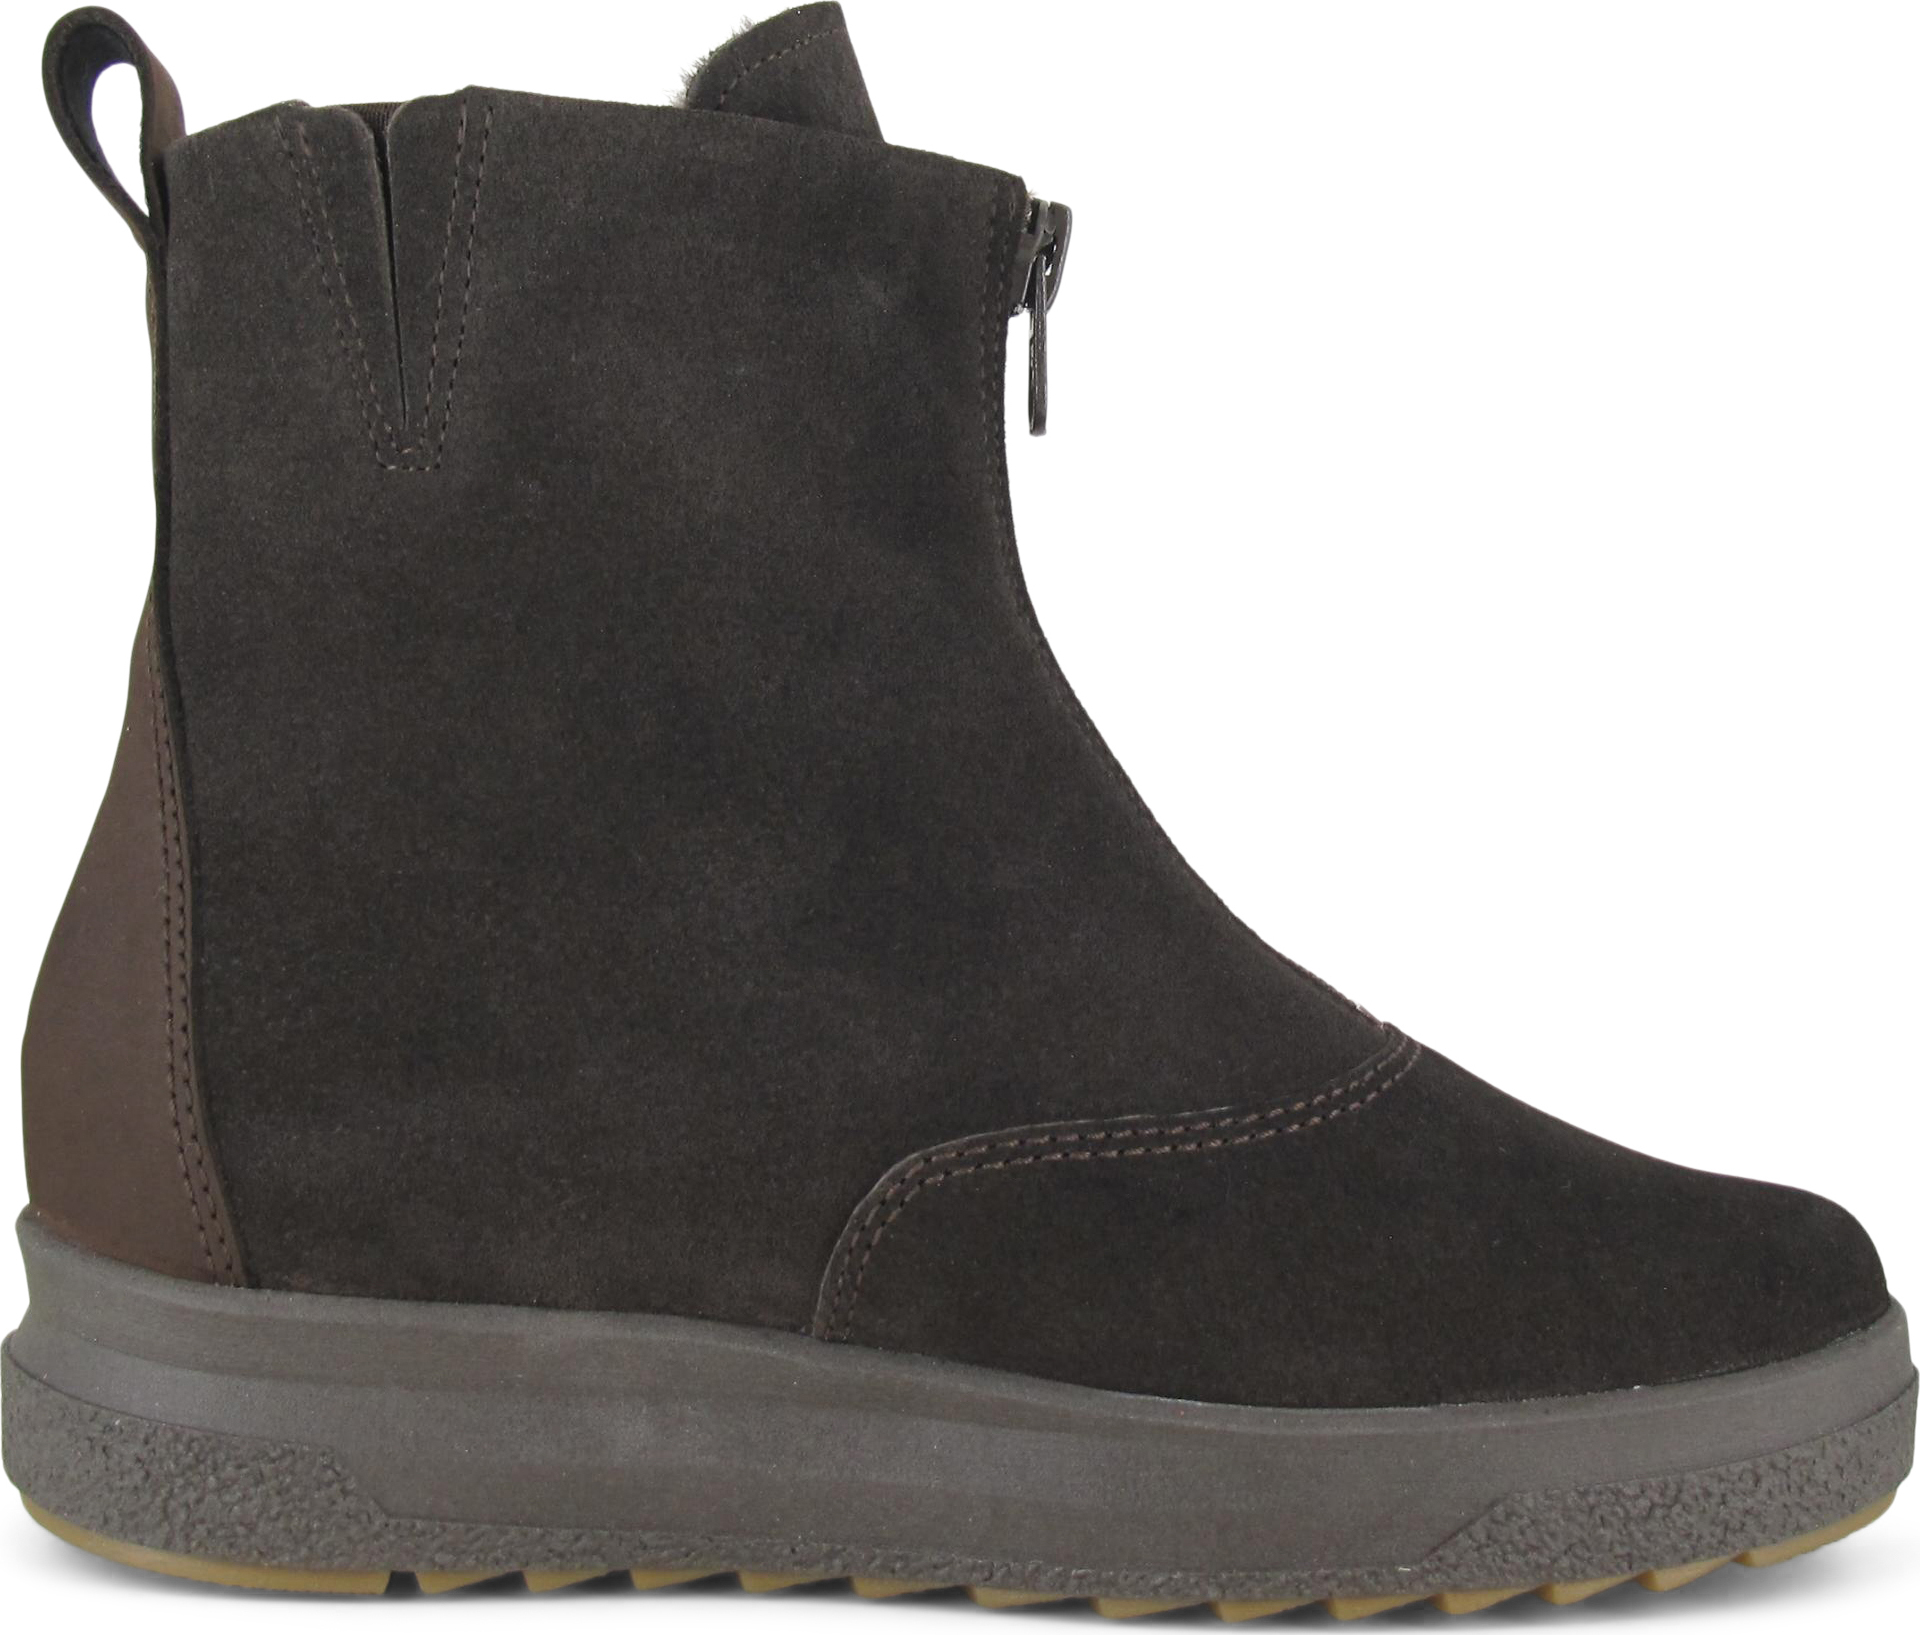 Women’s Uurre Gore-Tex Ankle Boot Bark Suede/Waxy/Fur (Bark S)